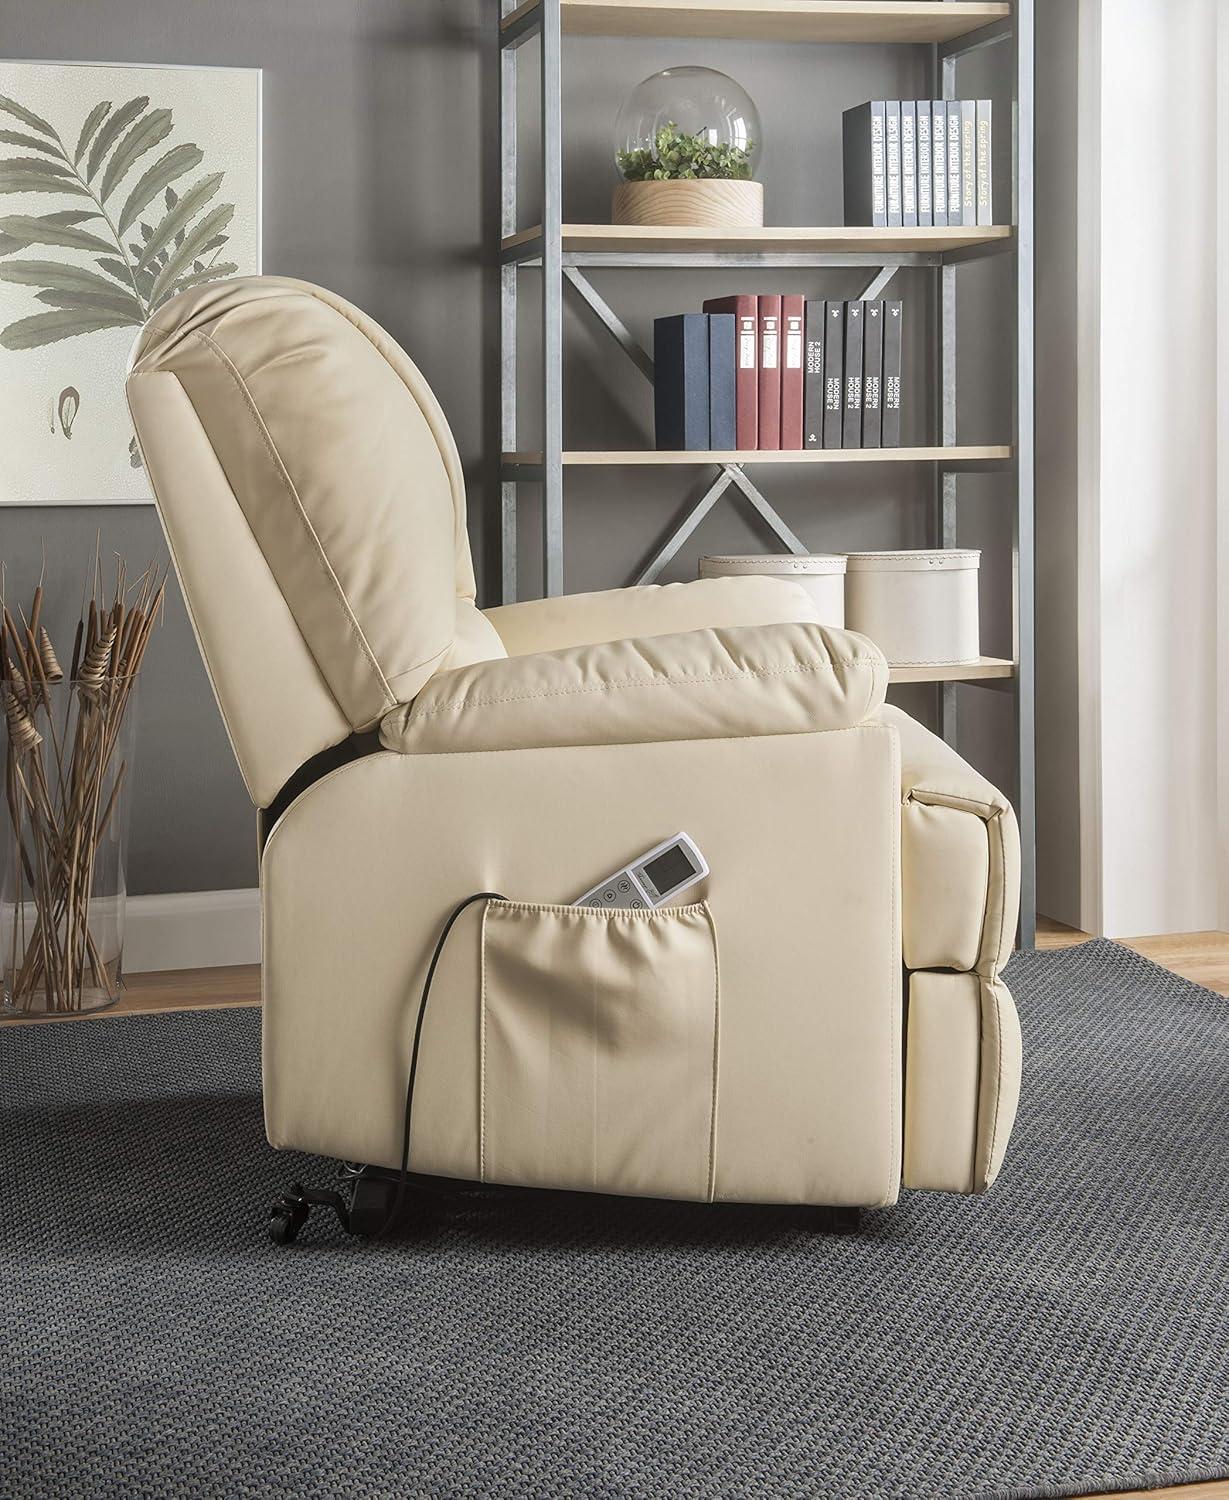 Luxurious Beige Faux Leather Massage Recliner with Power Lift